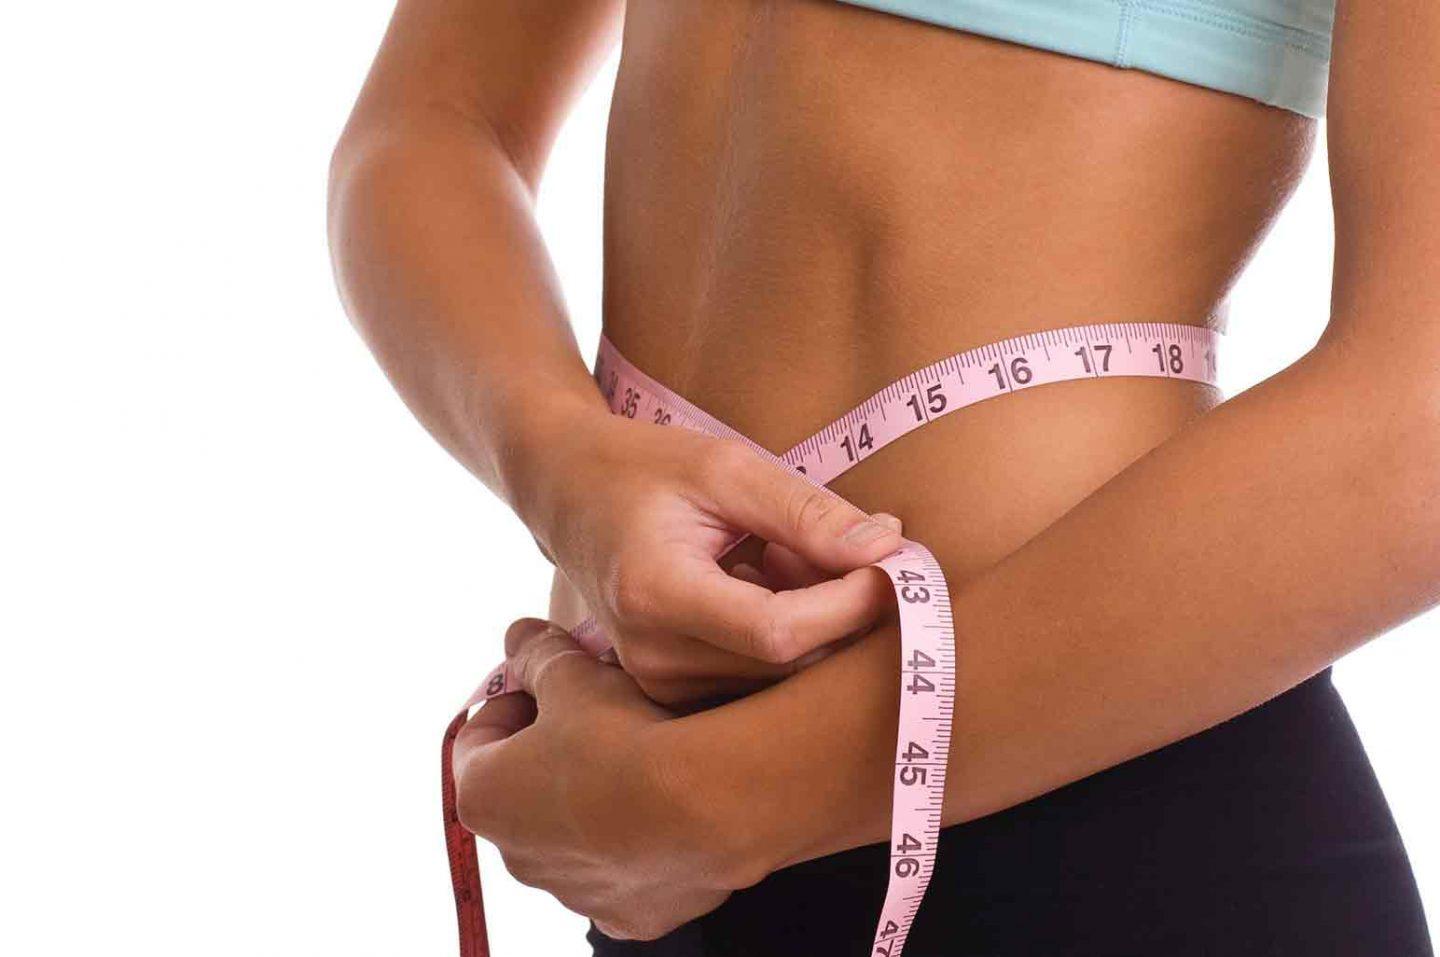 Surgical Procedures to Lose Weight